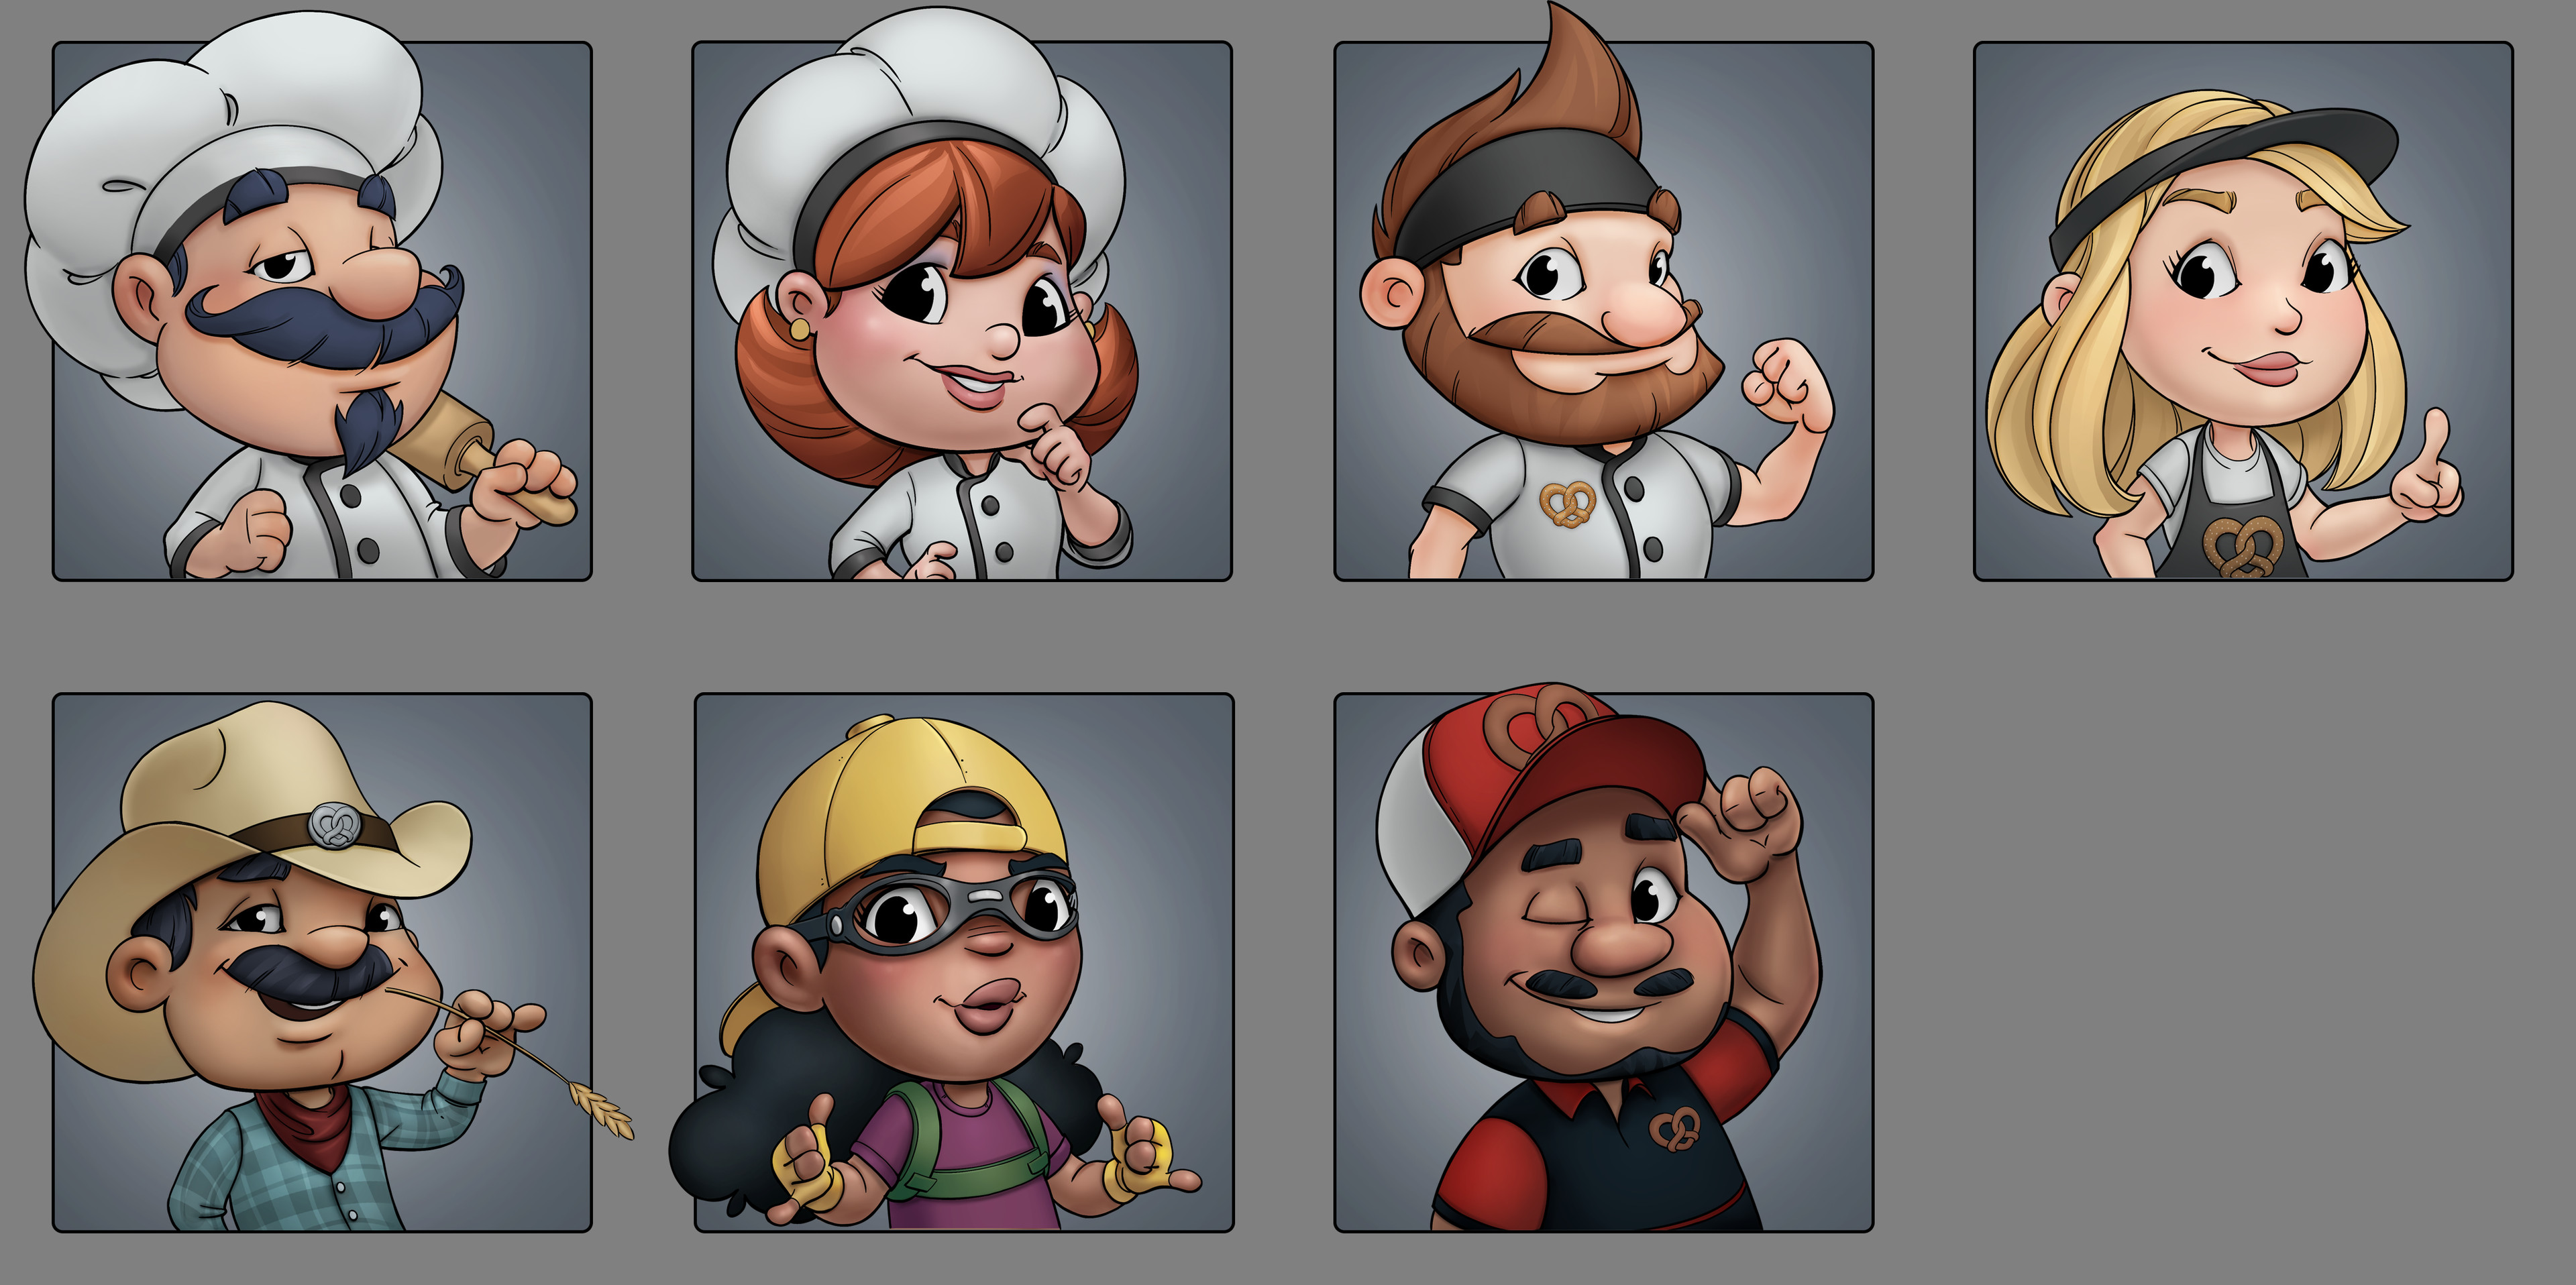 In game avatar images -
I like to add in the hands to give more expression to the characters